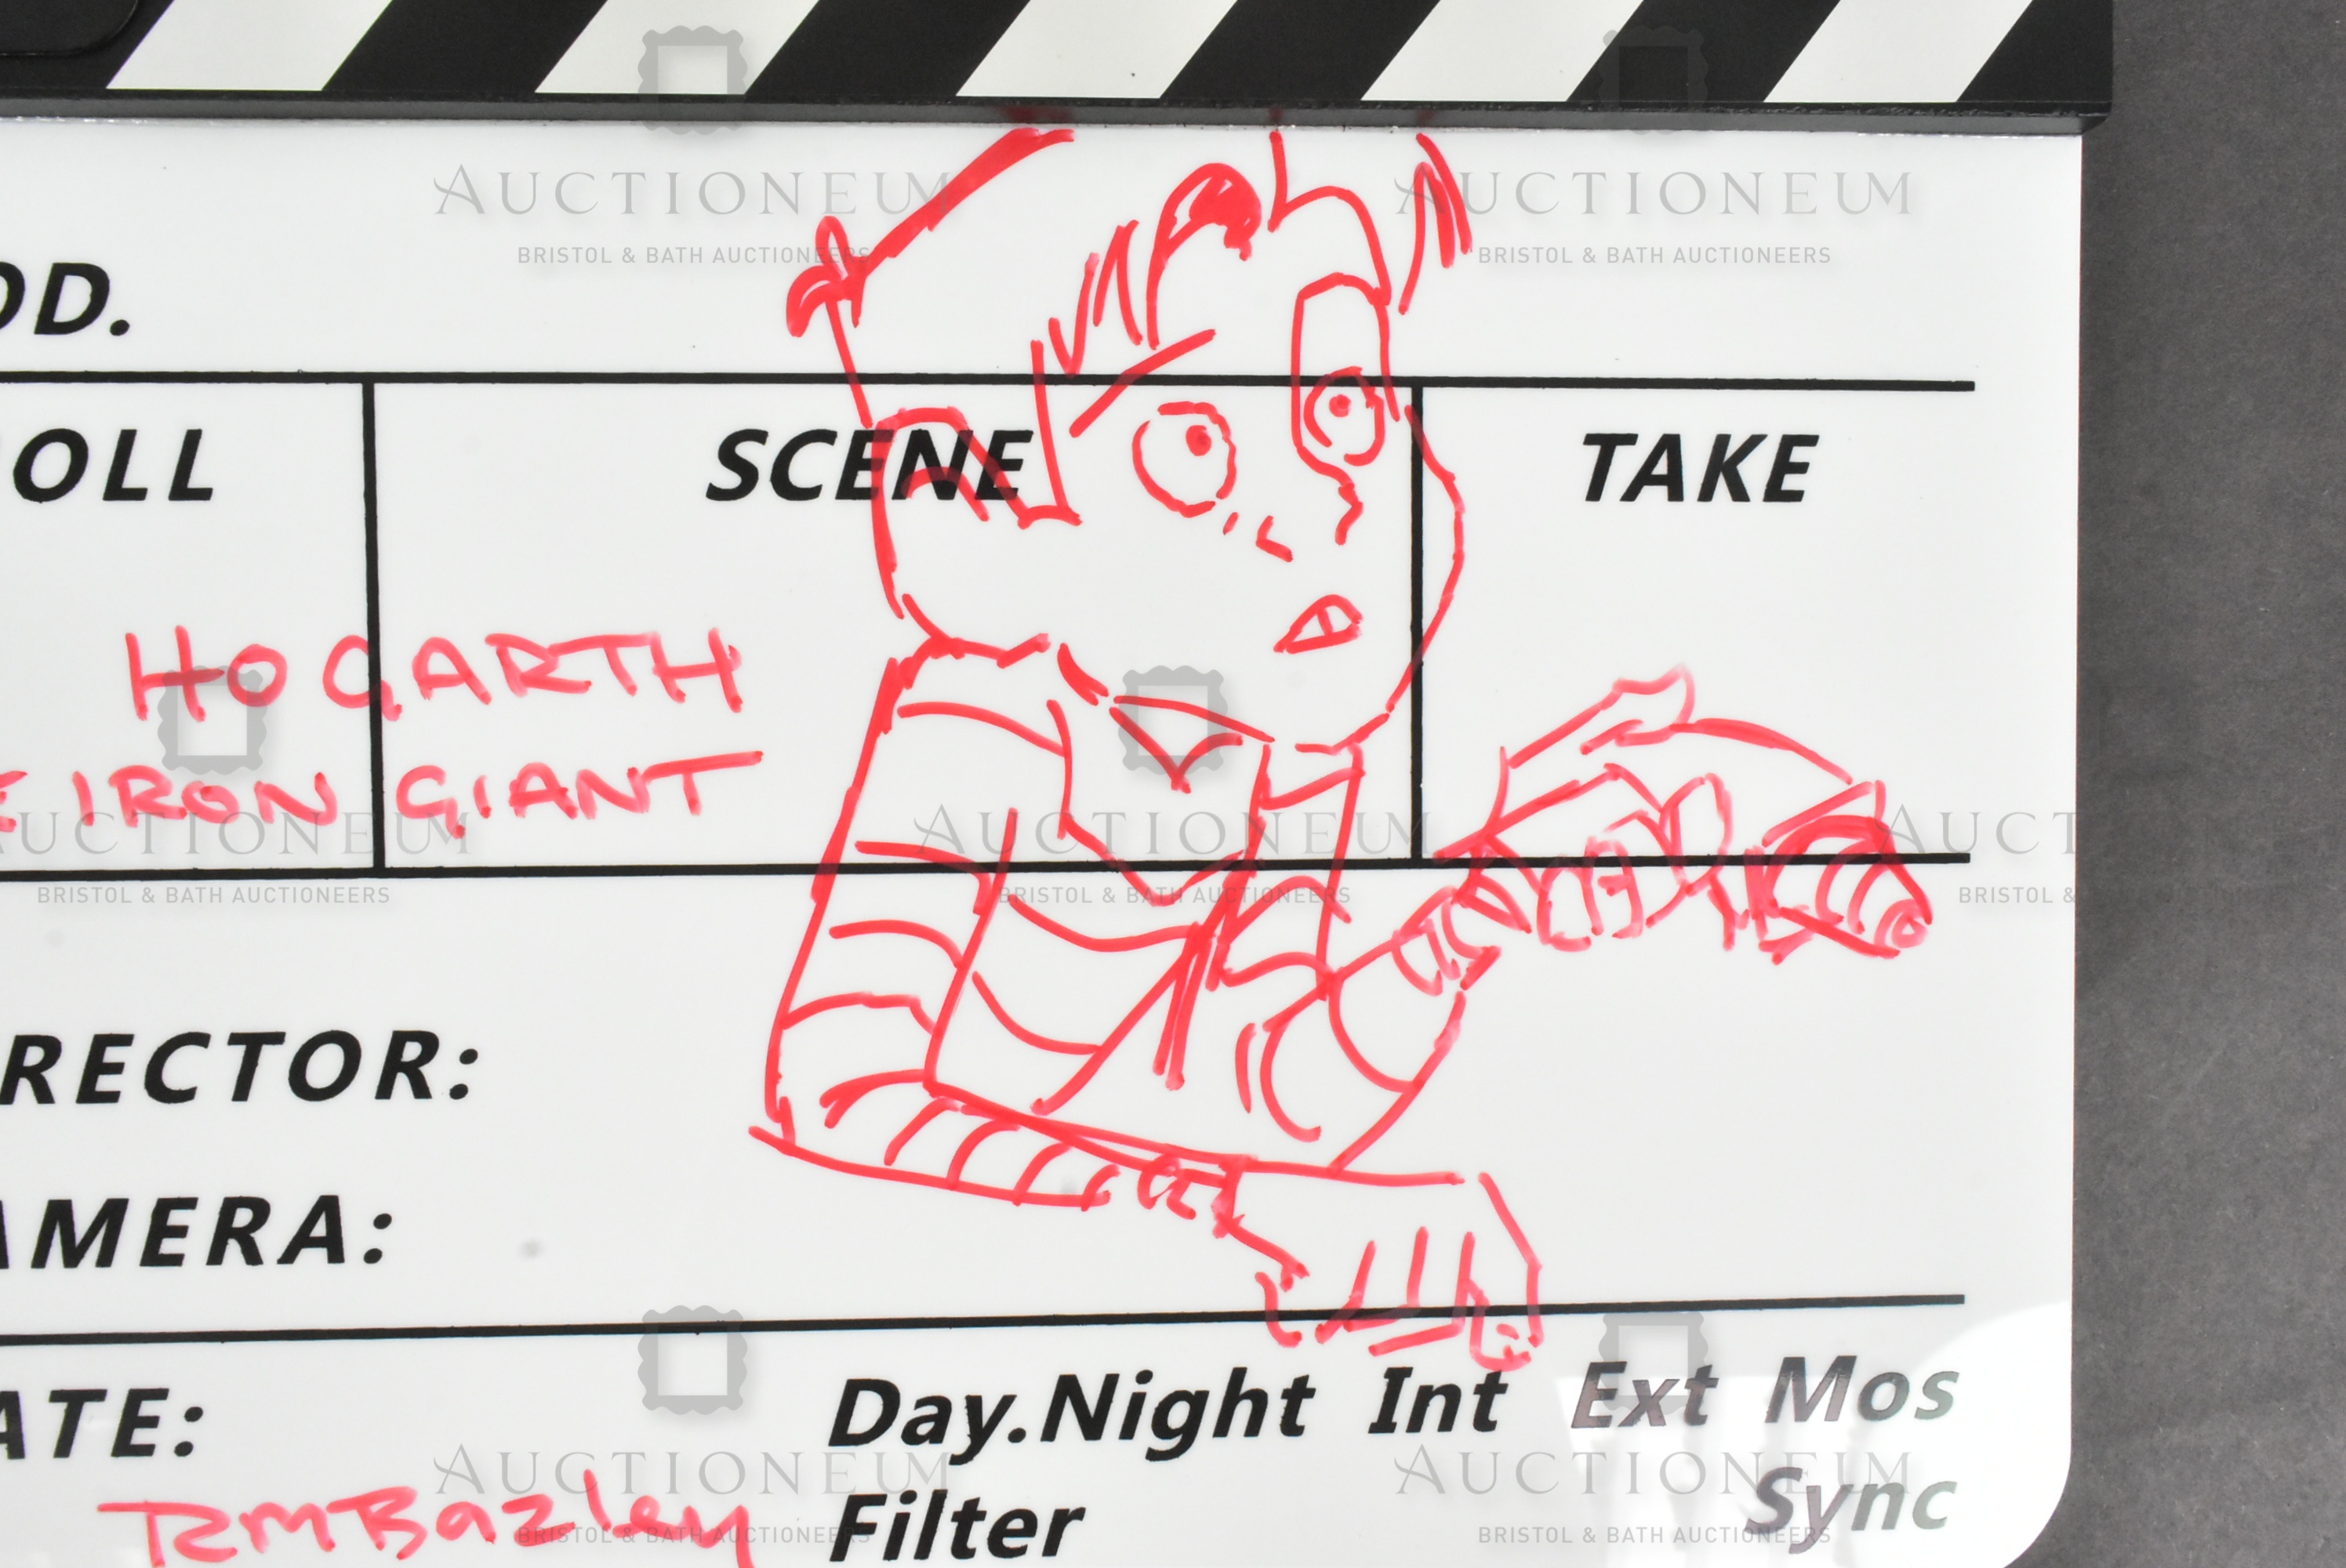 THE IRON GIANT - CLAPPERBOARD SIGNED & SKETCHED BY BAZLEY - Image 2 of 5